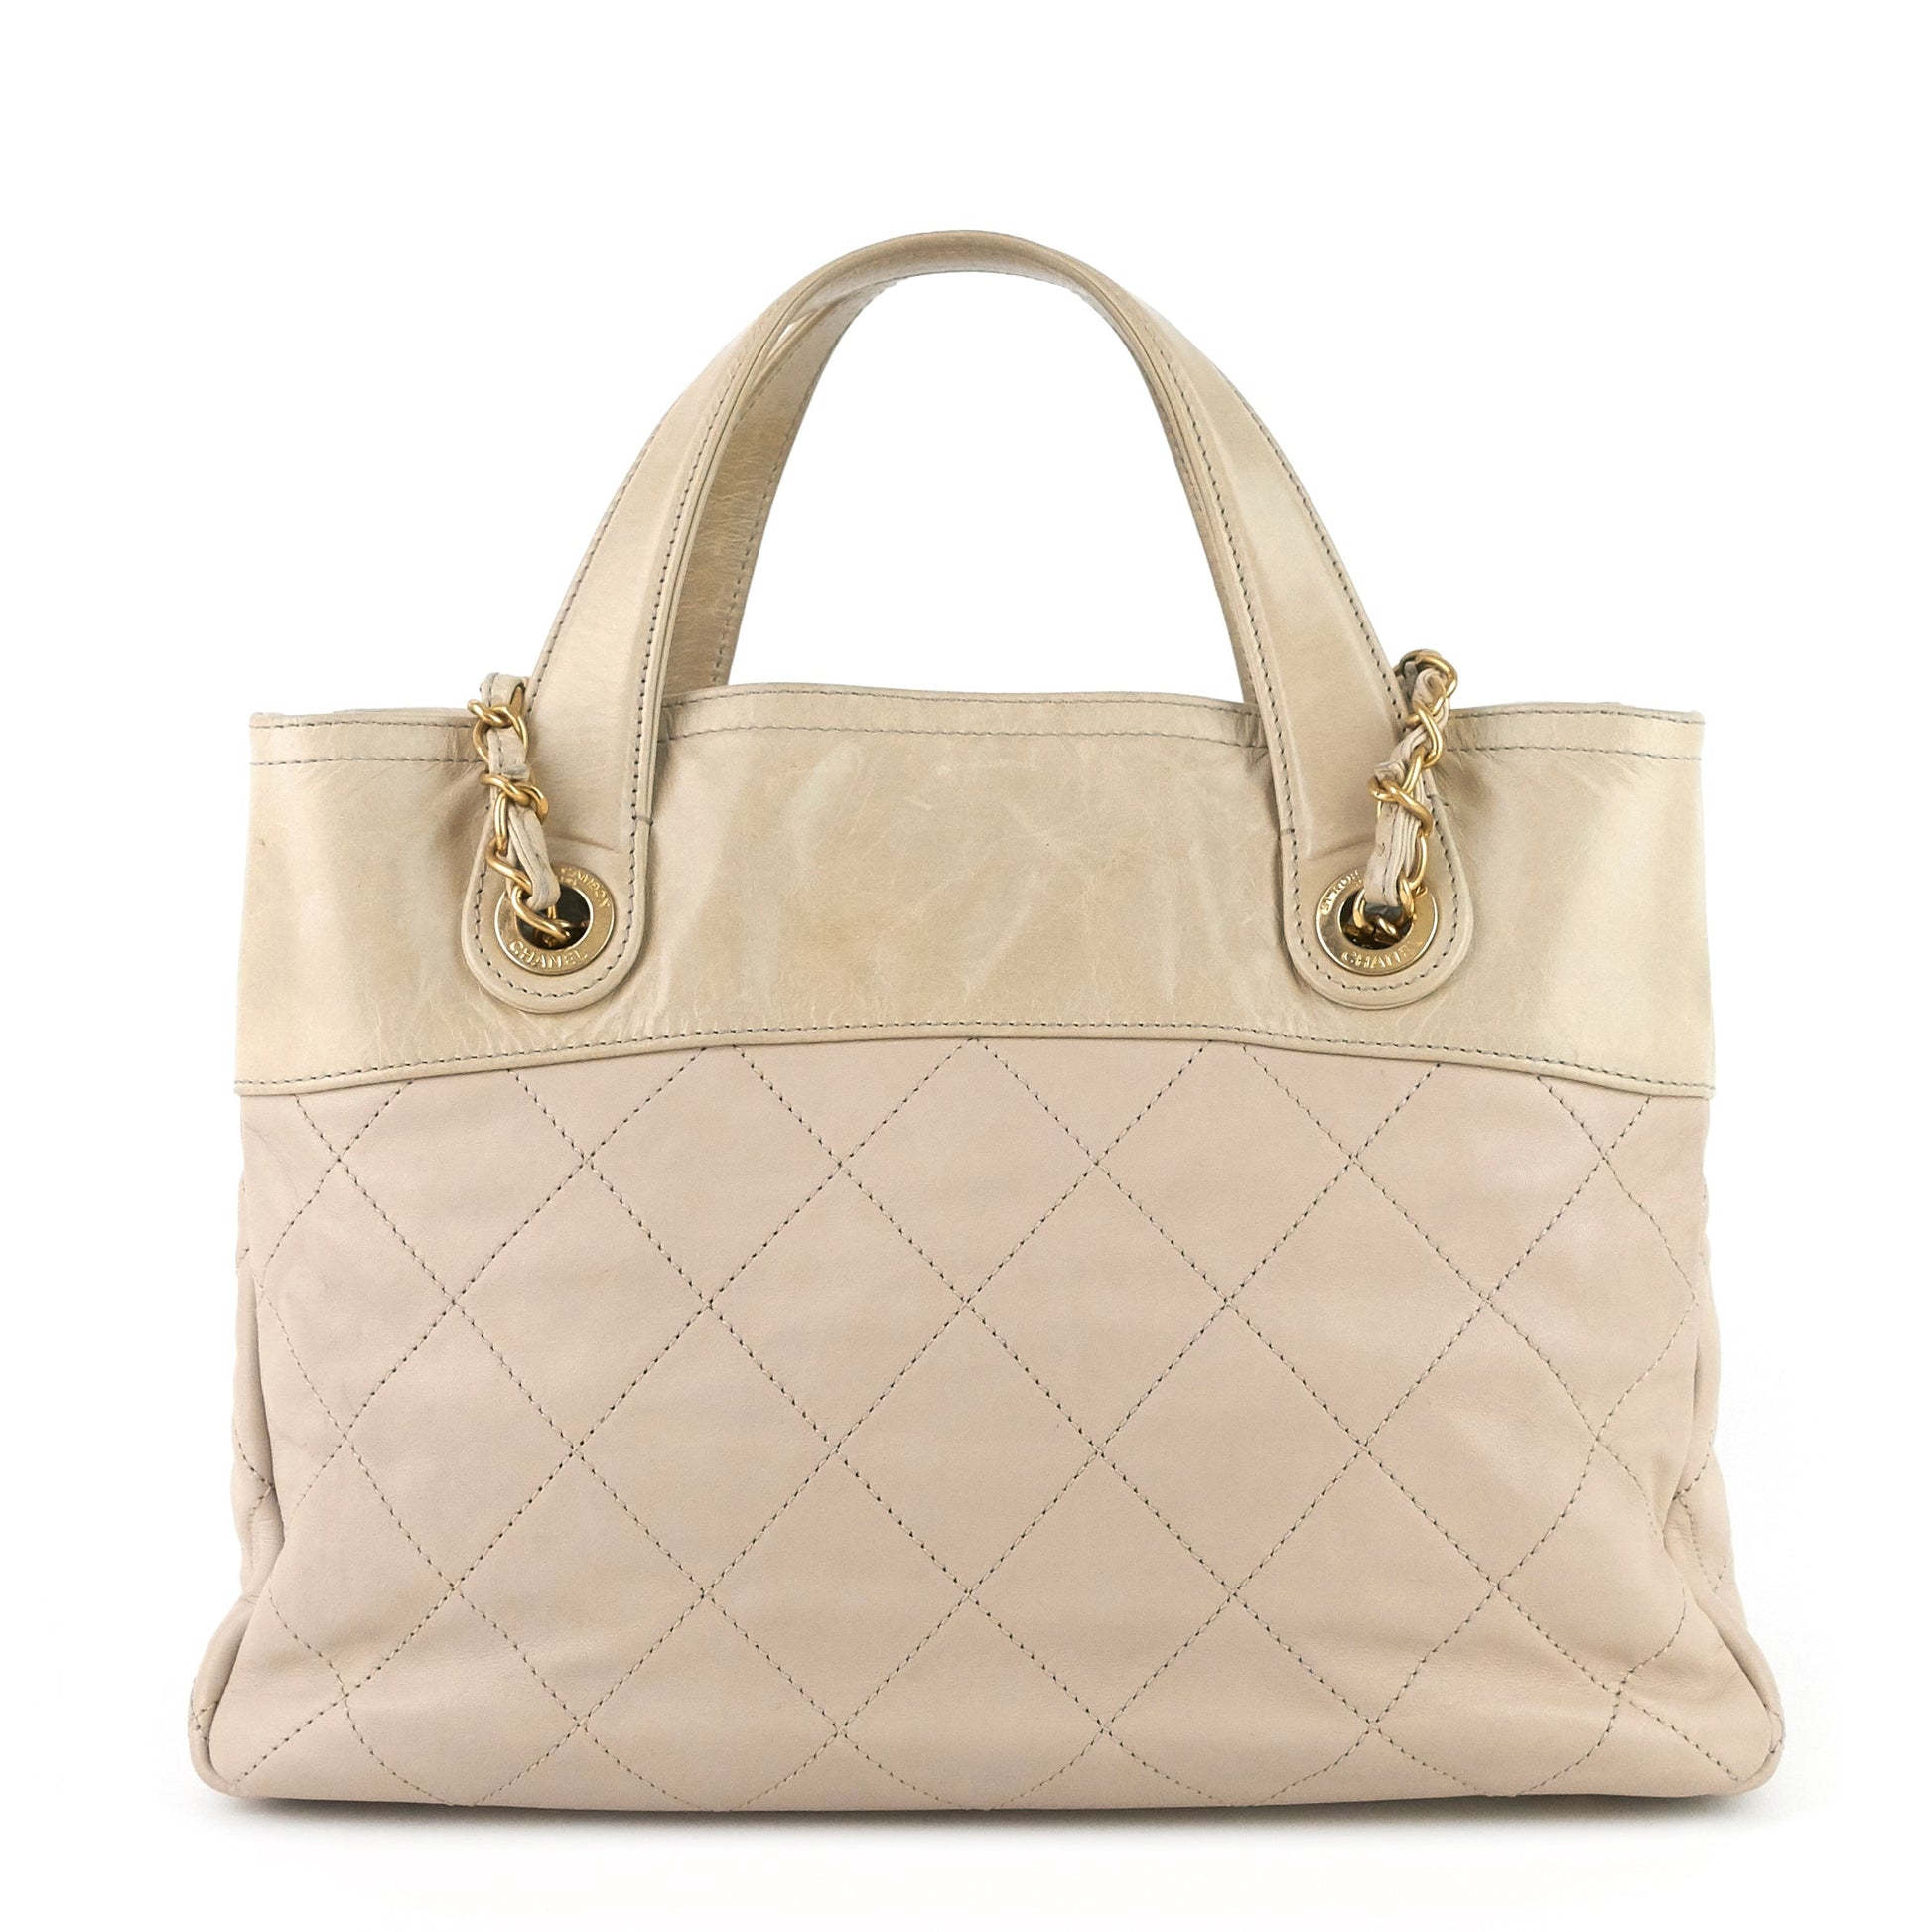 CHANEL In The Mix Calfskin Tote Bag